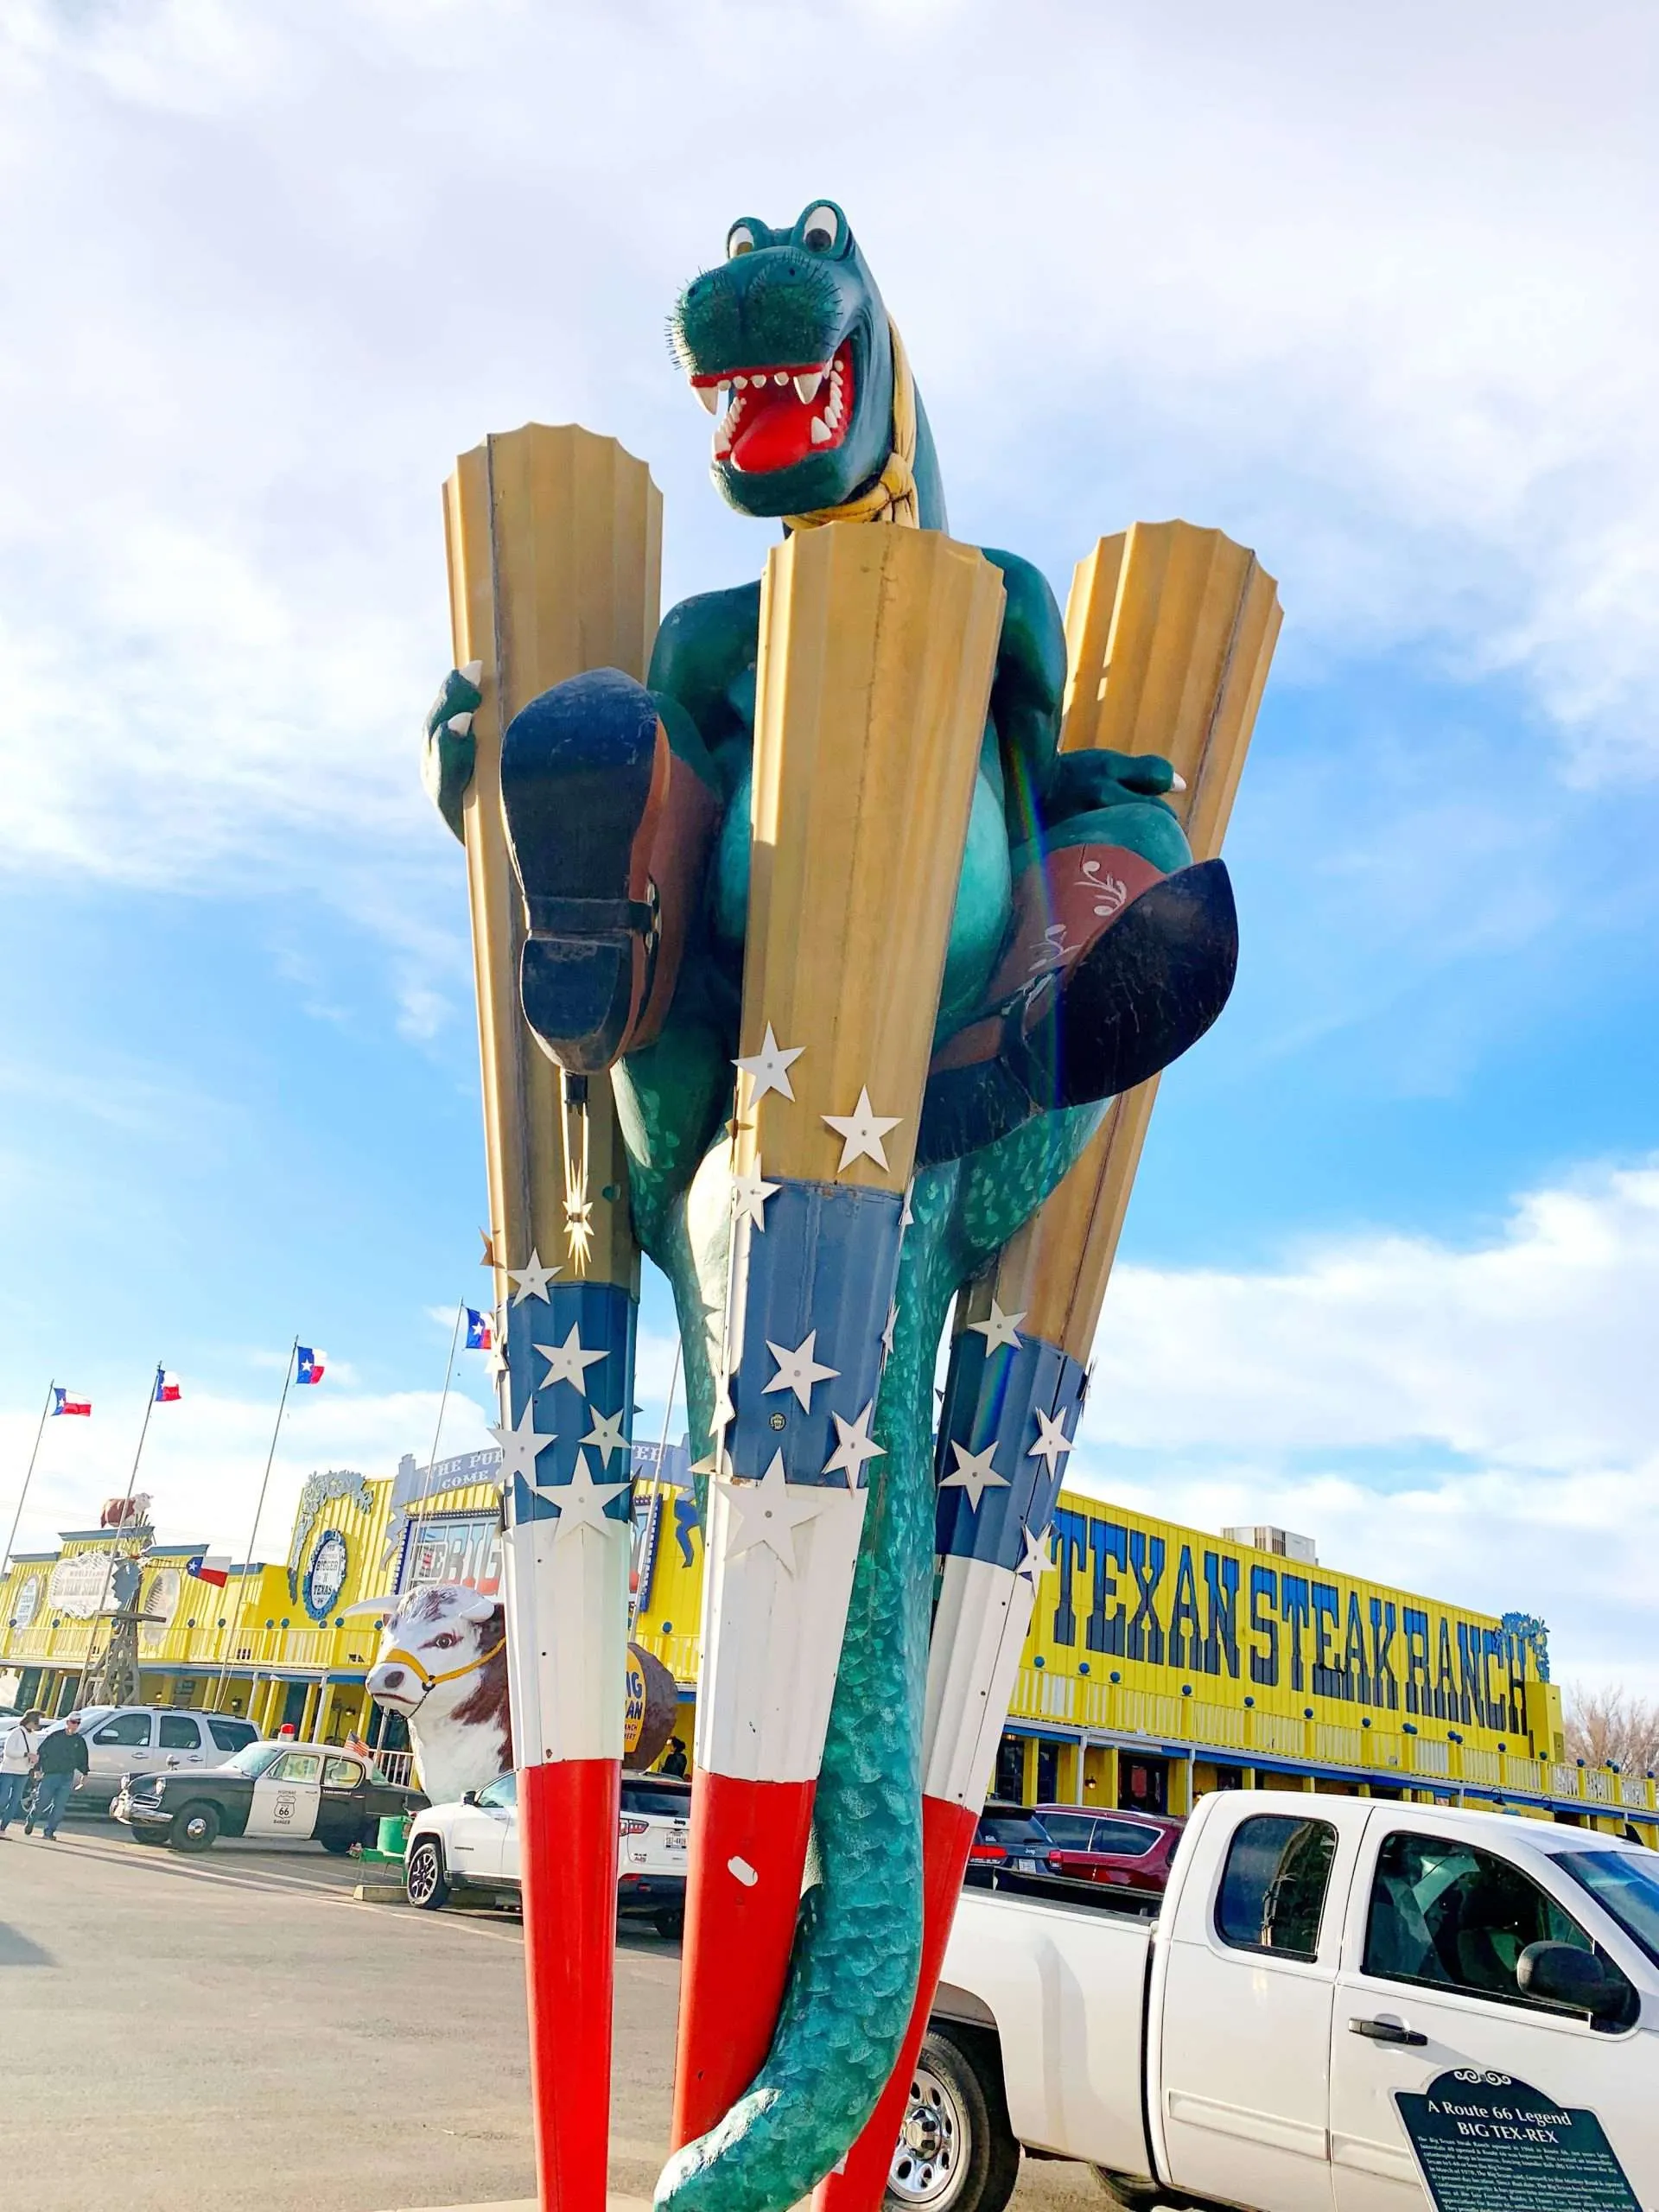 To do in Amarillo: The Big Texan